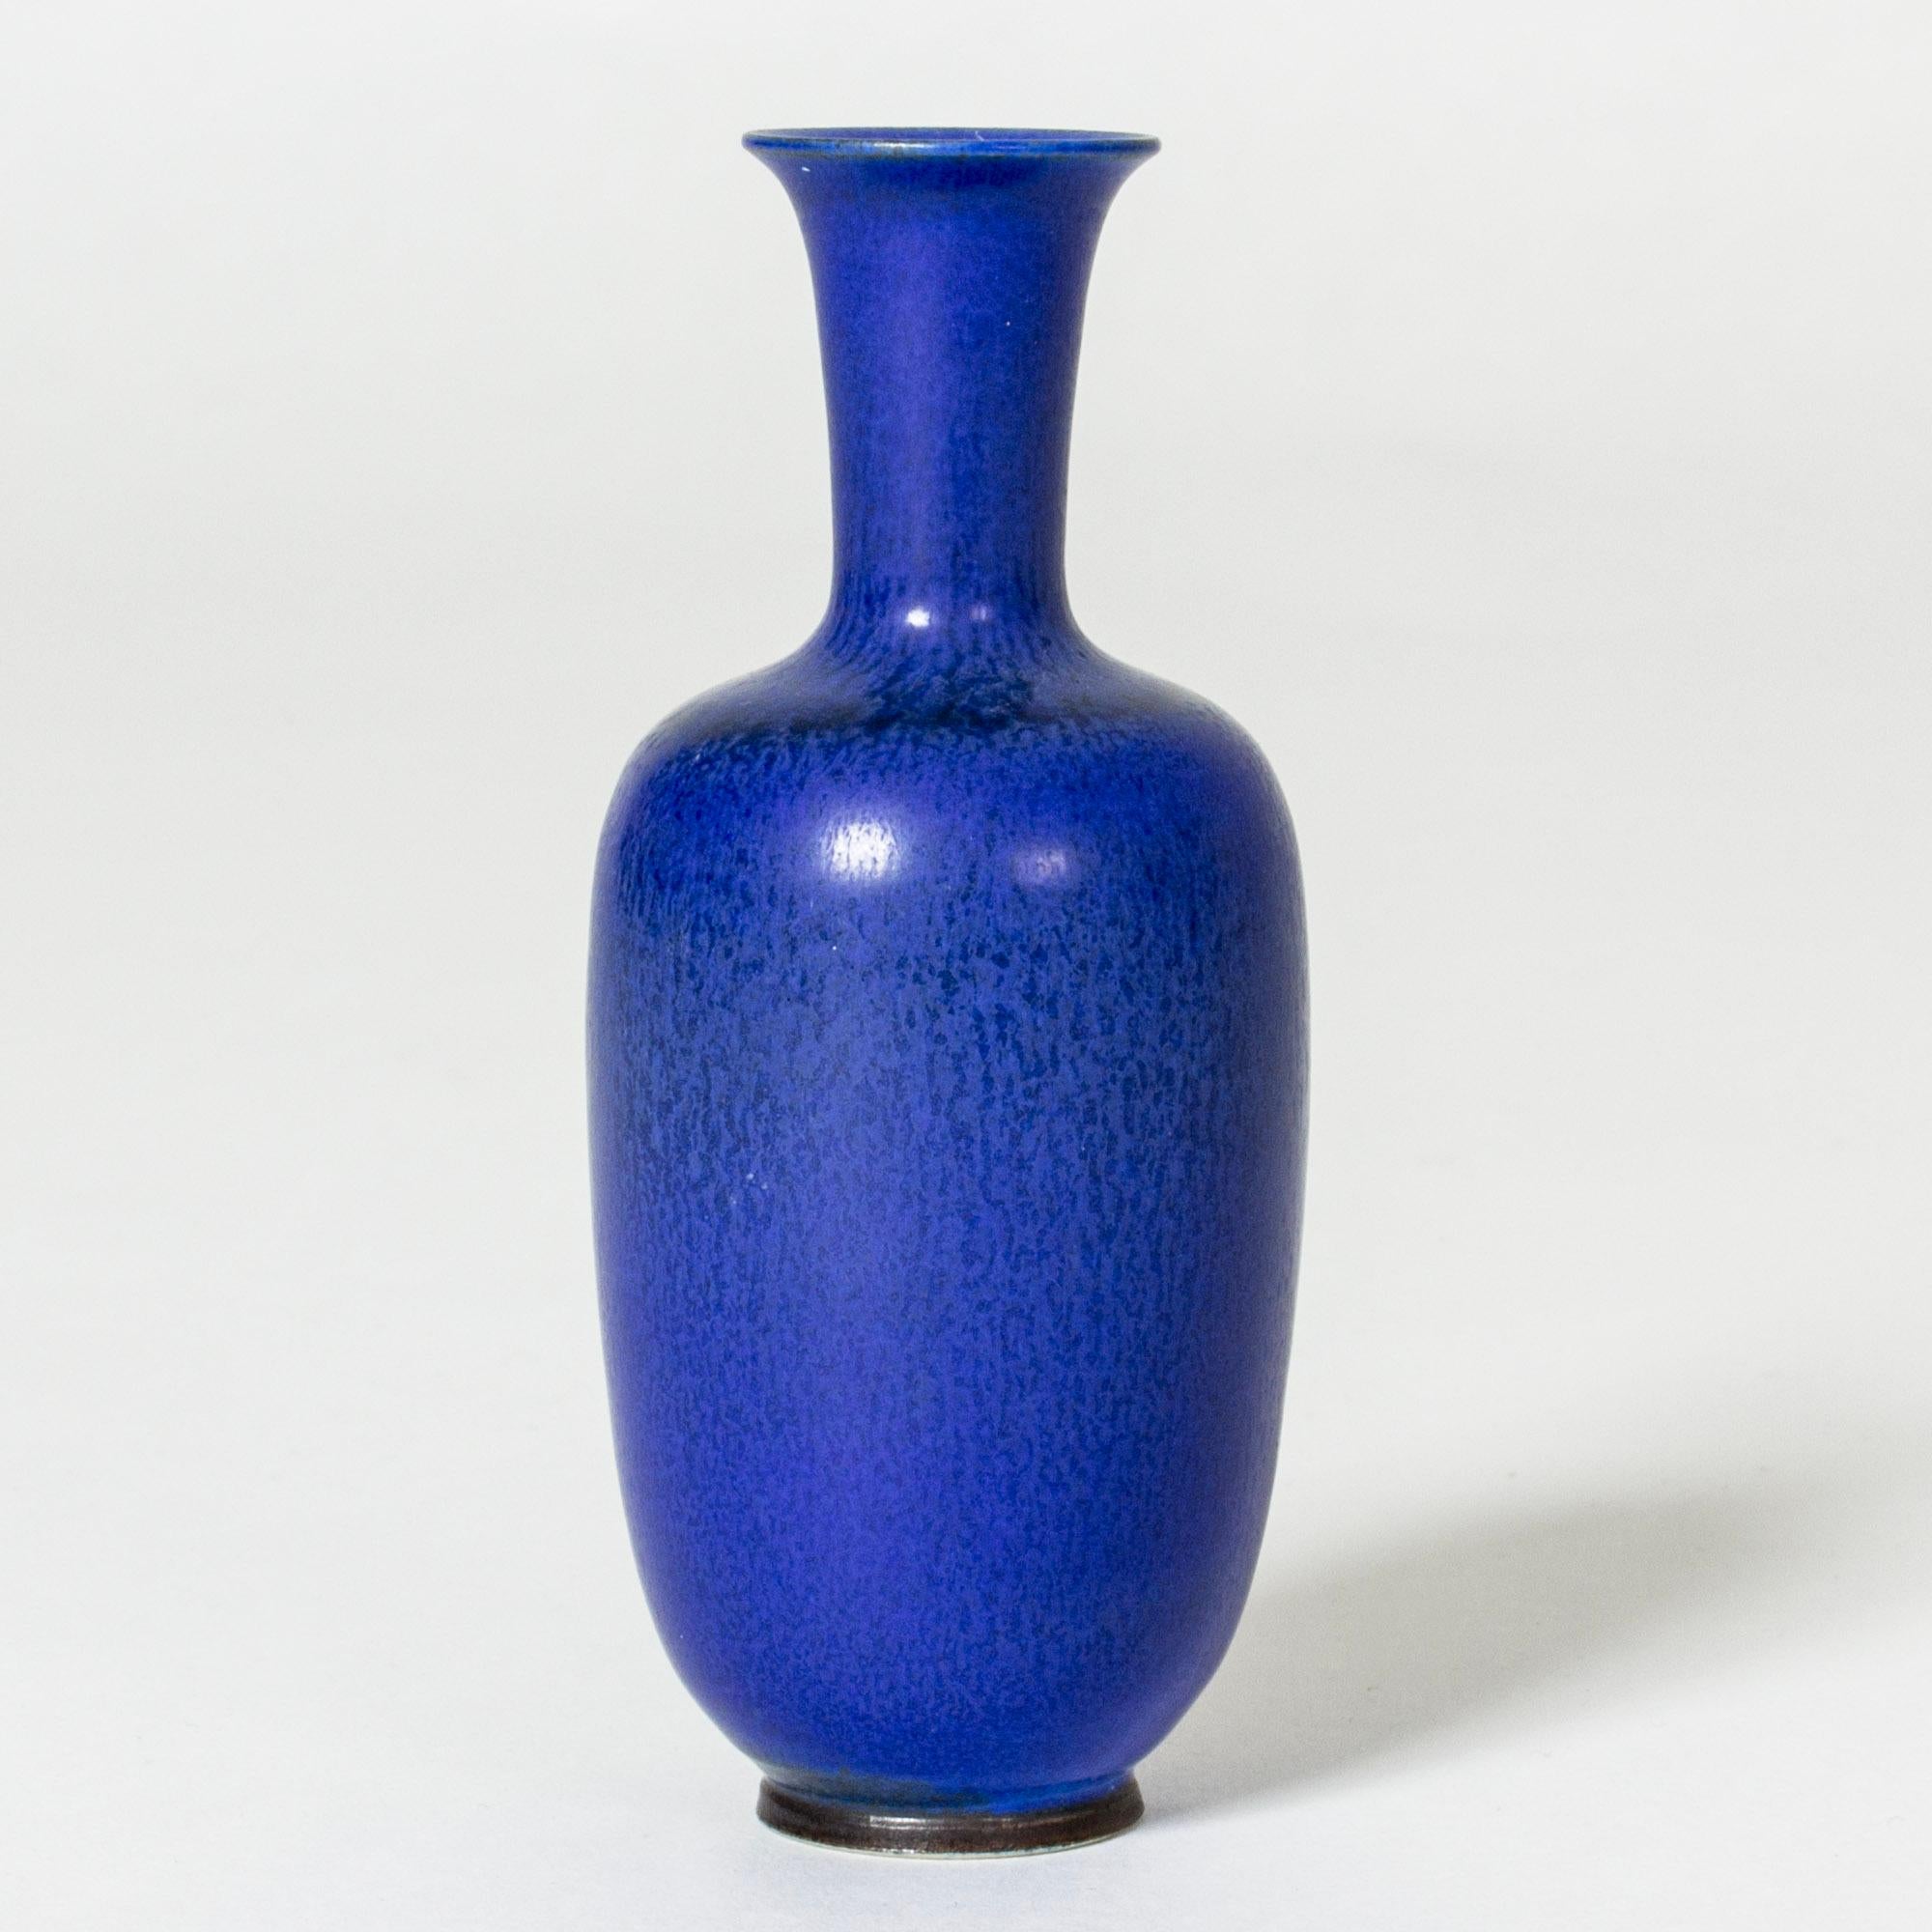 Small stoneware vase by Berndt Friberg, in an elegant, classic form with bright blue hare’s fur glaze.

Berndt Friberg was a Swedish ceramicist, renowned for his stoneware vases and vessels for Gustavsberg. His pure, composed designs with satiny,